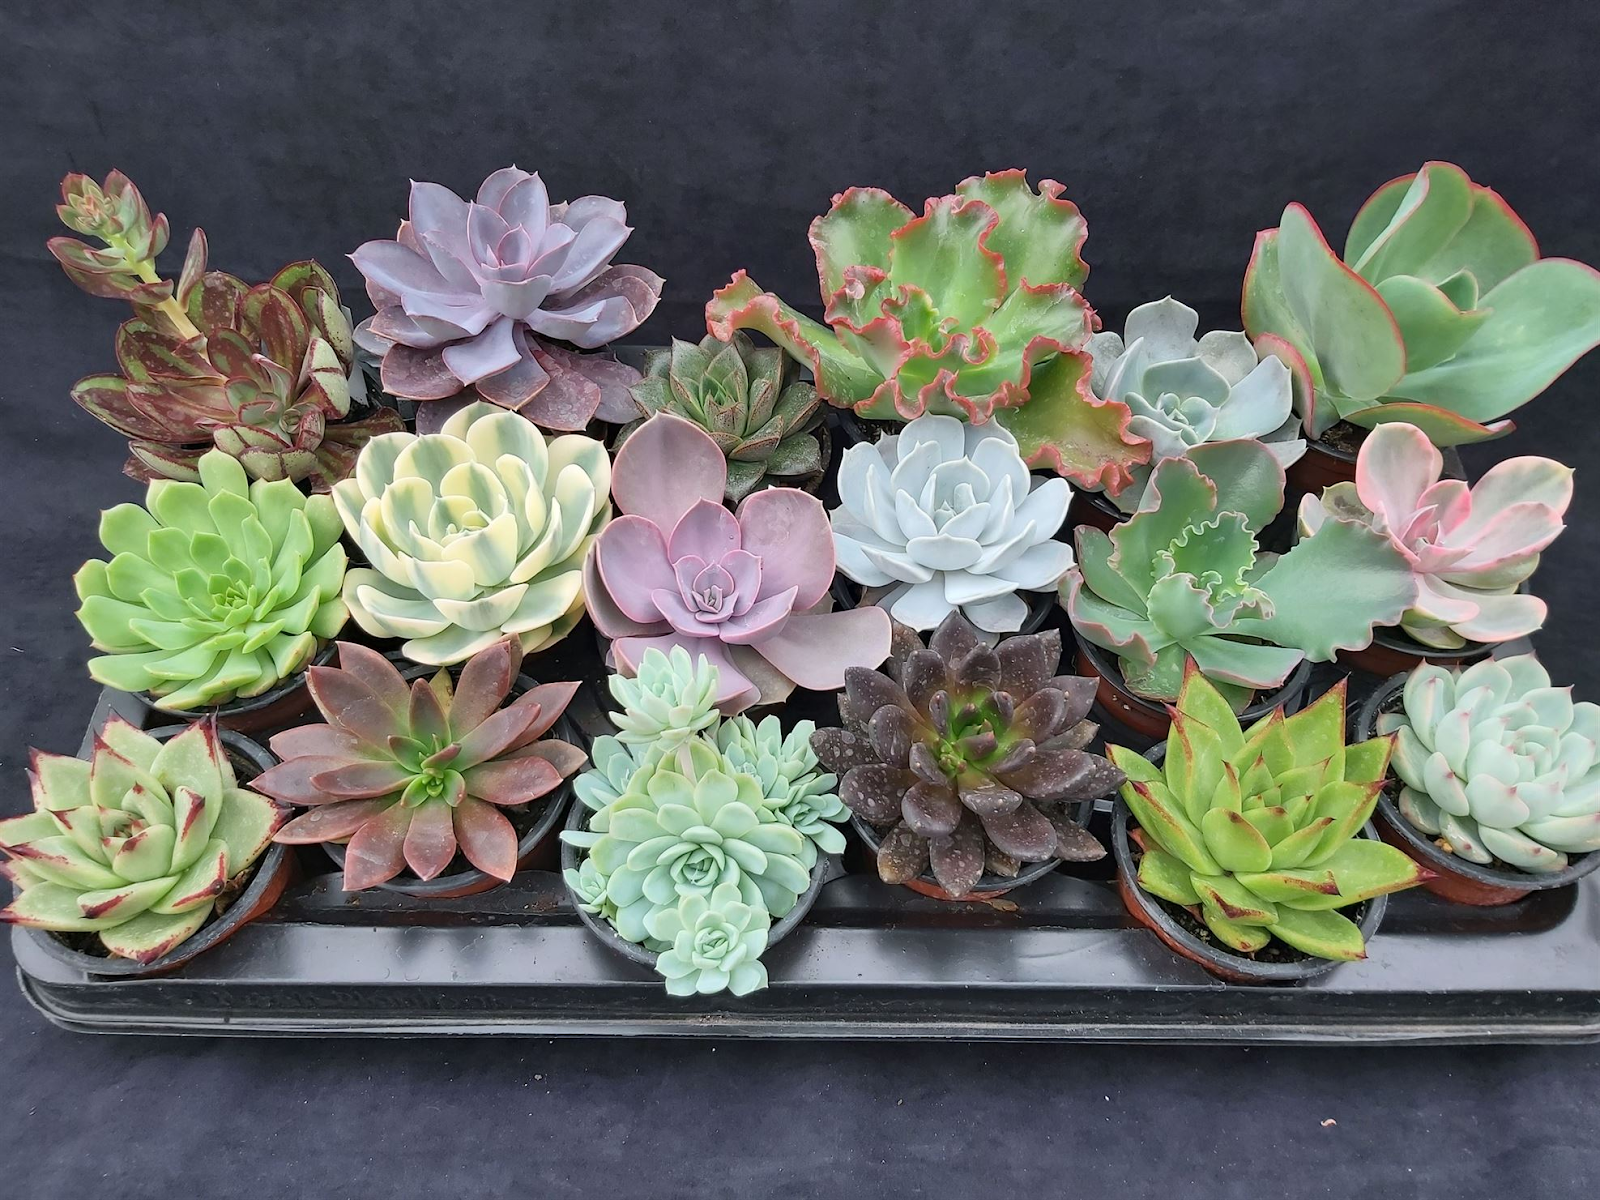 Echeveria Elegans plant in different color and shape